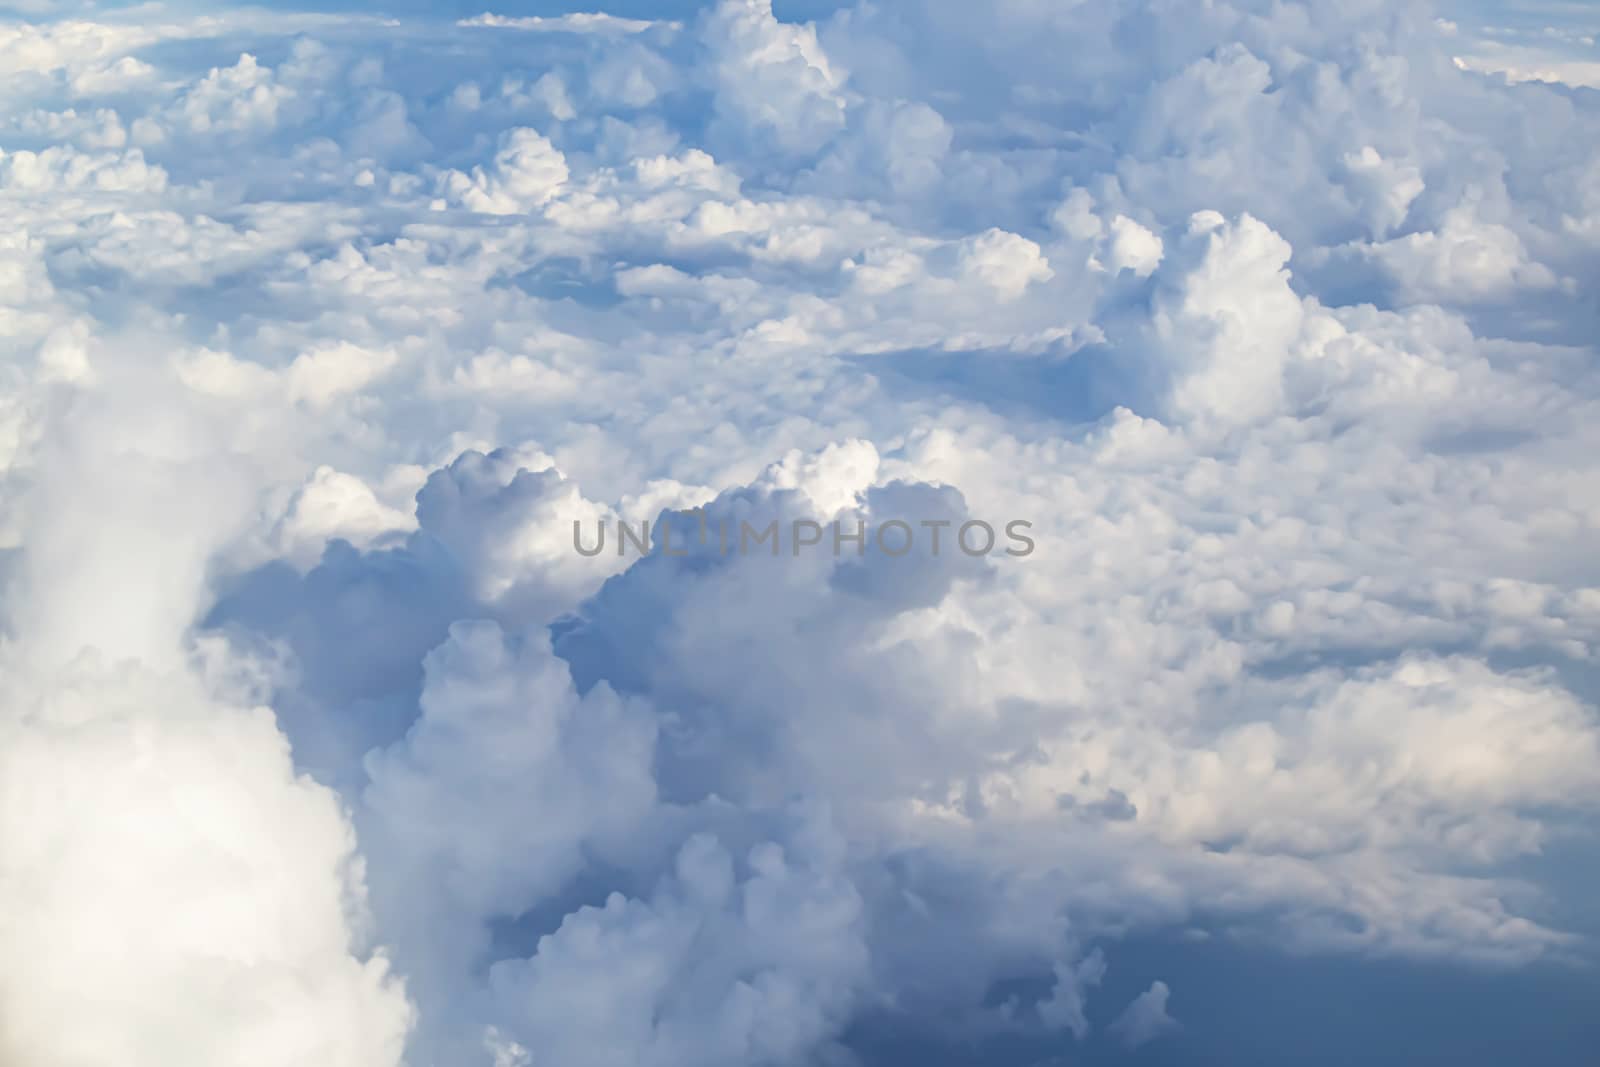 The Beautiful sky with white clouds taken picture on airplane